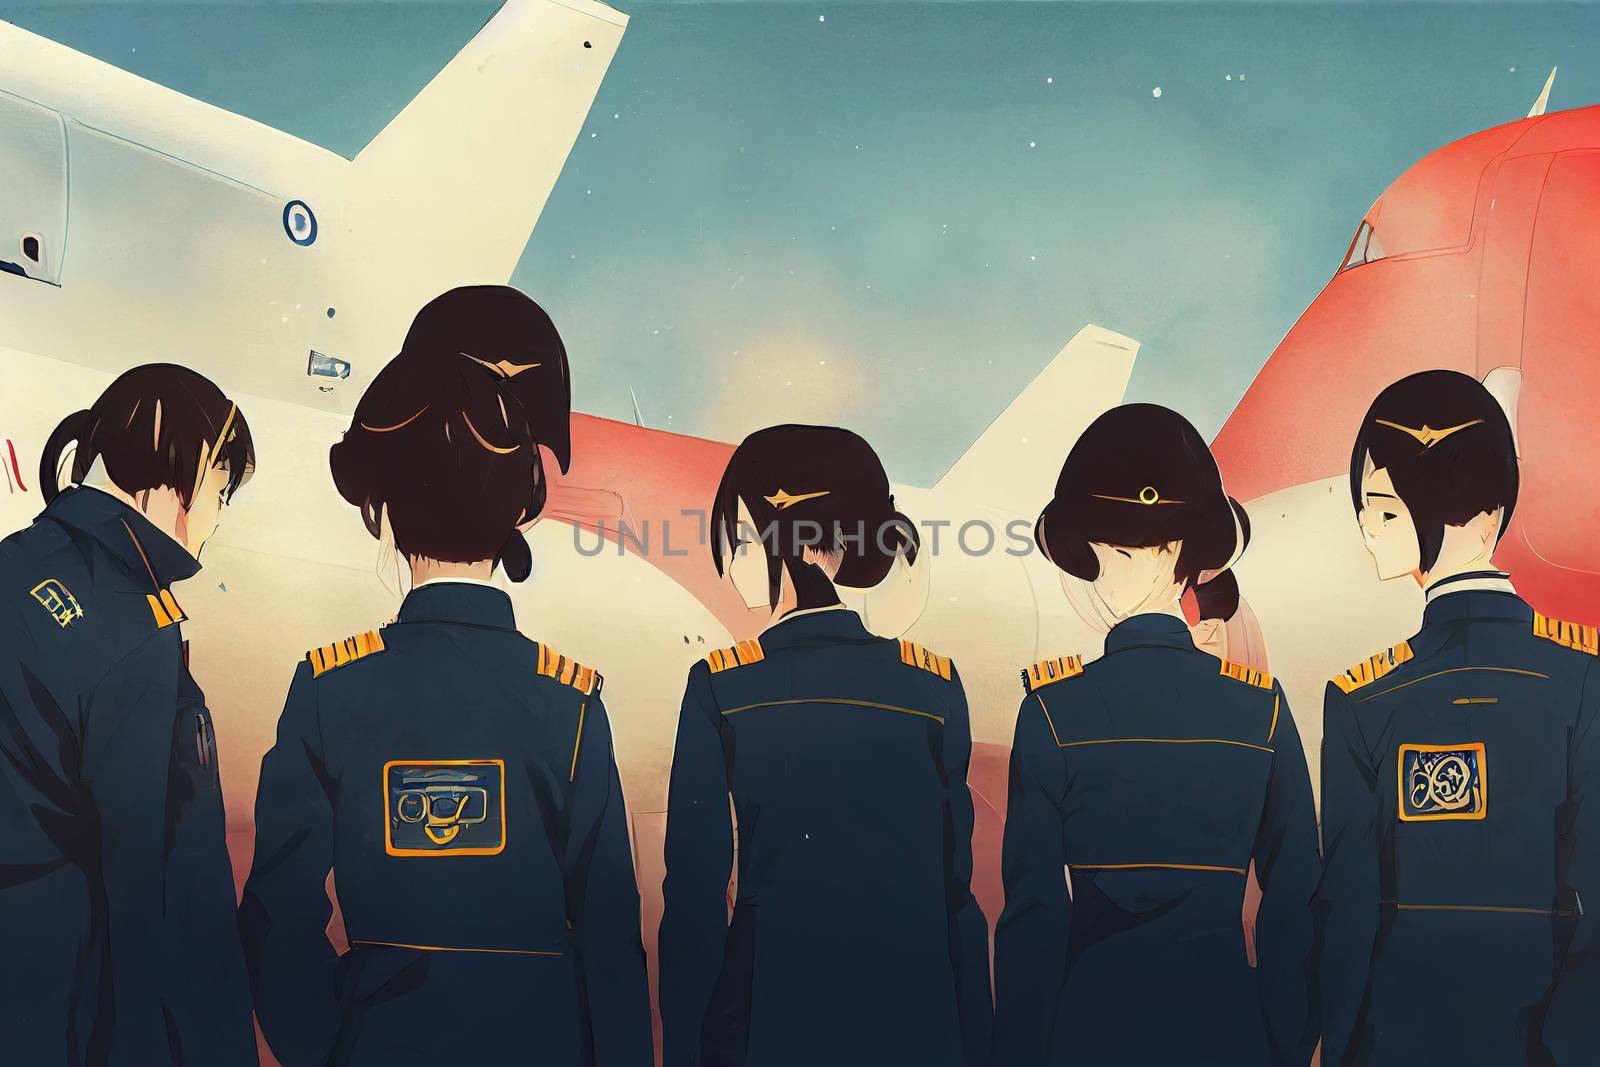 Air Crew Members ,Anime style illustration by 2ragon